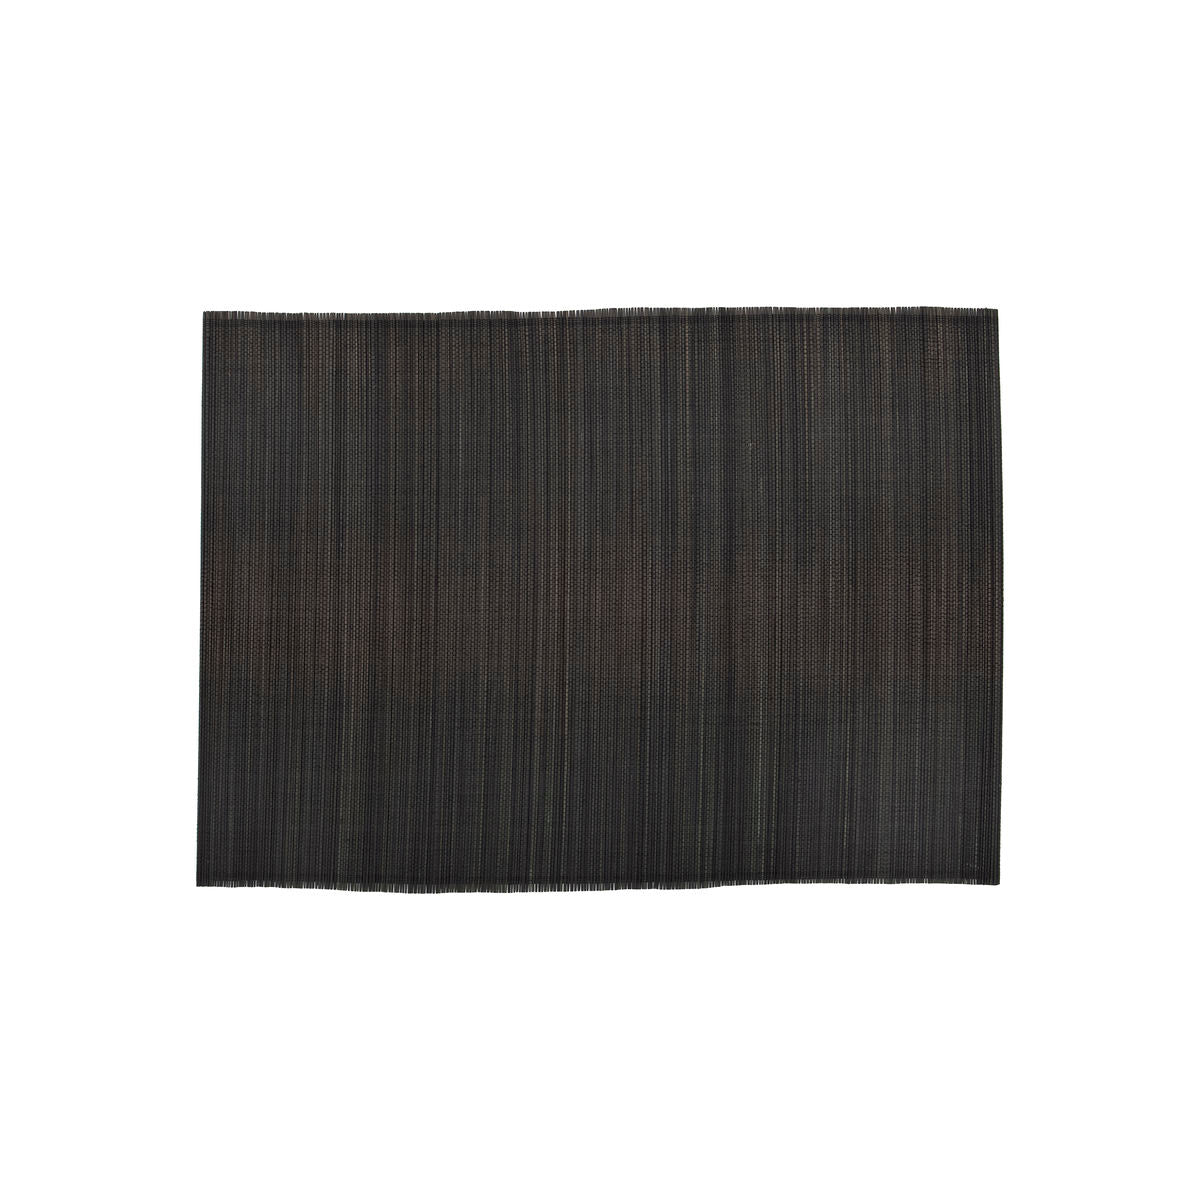 Set of 4 Black Bamboo Placemats single